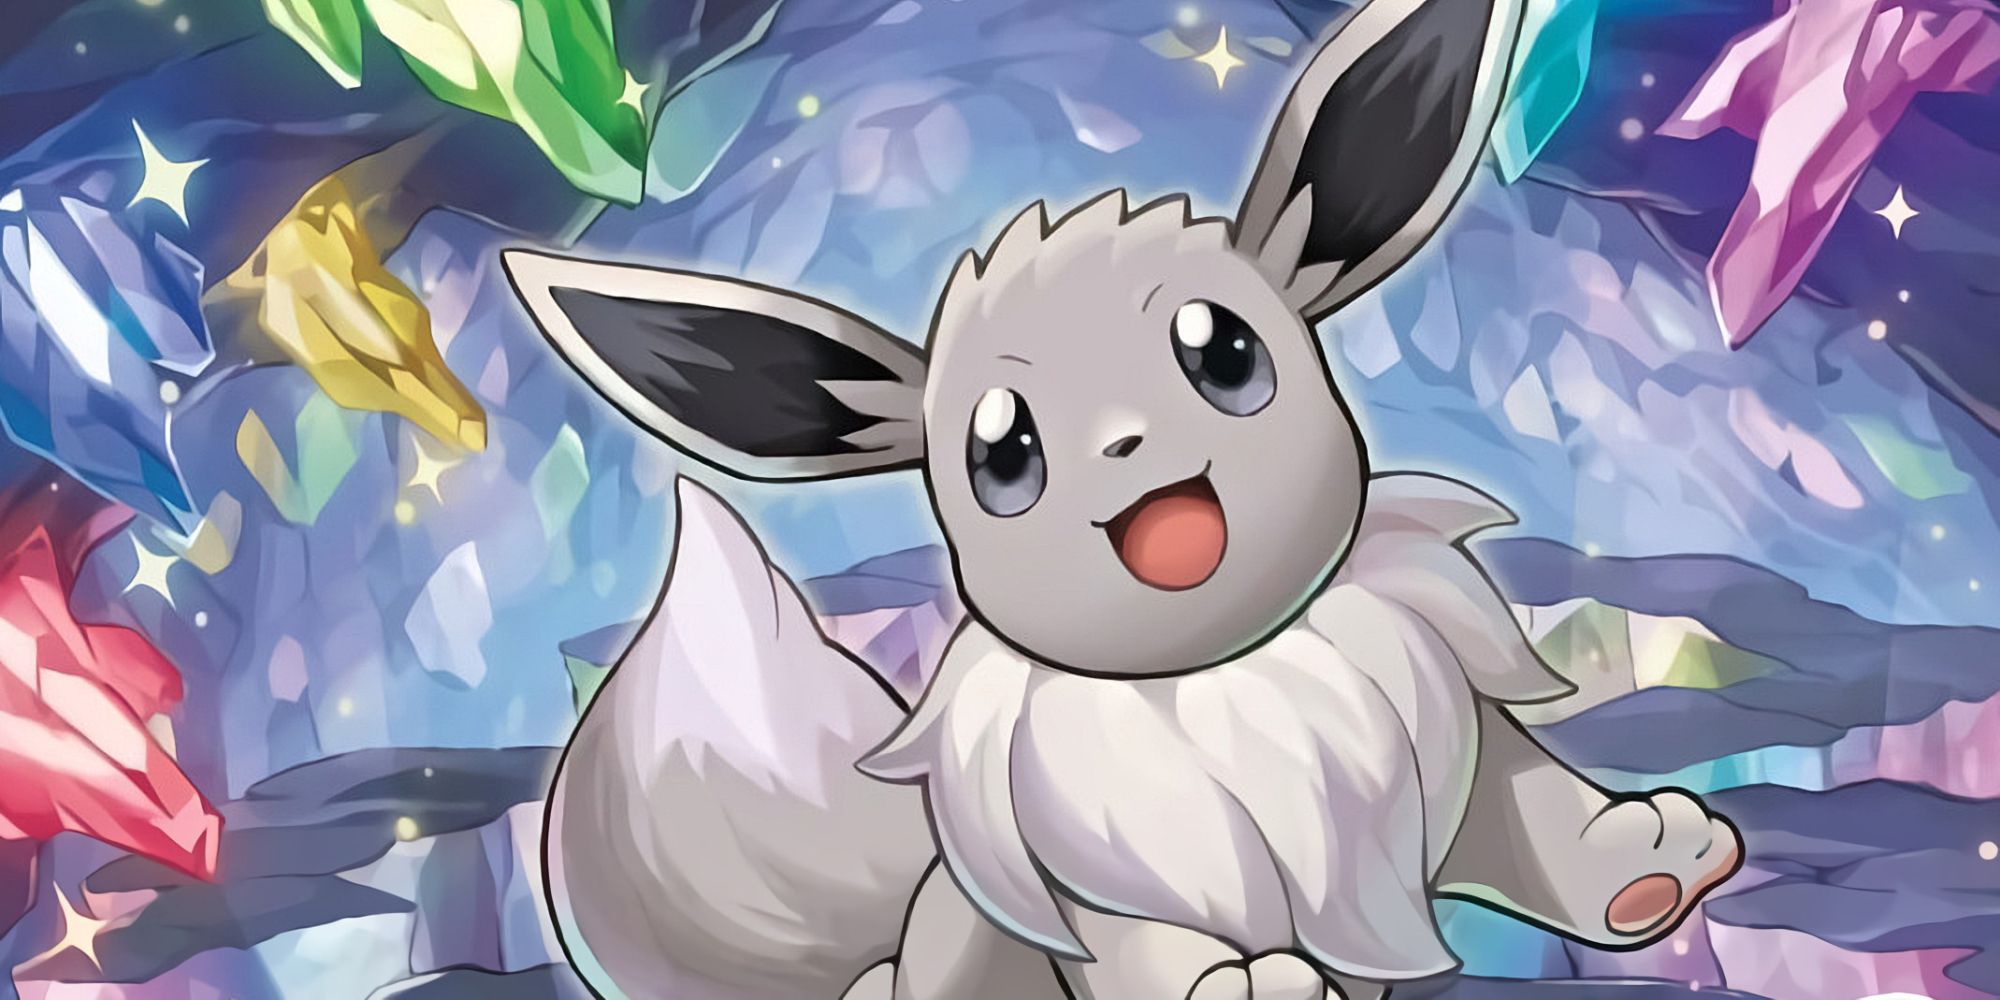 Close-up on the artwork of the Pokémon TCG's Radiant Eevee Sword and Shield promo card, showing a Shiny Eevee in a cave with multi-colored stalactites.